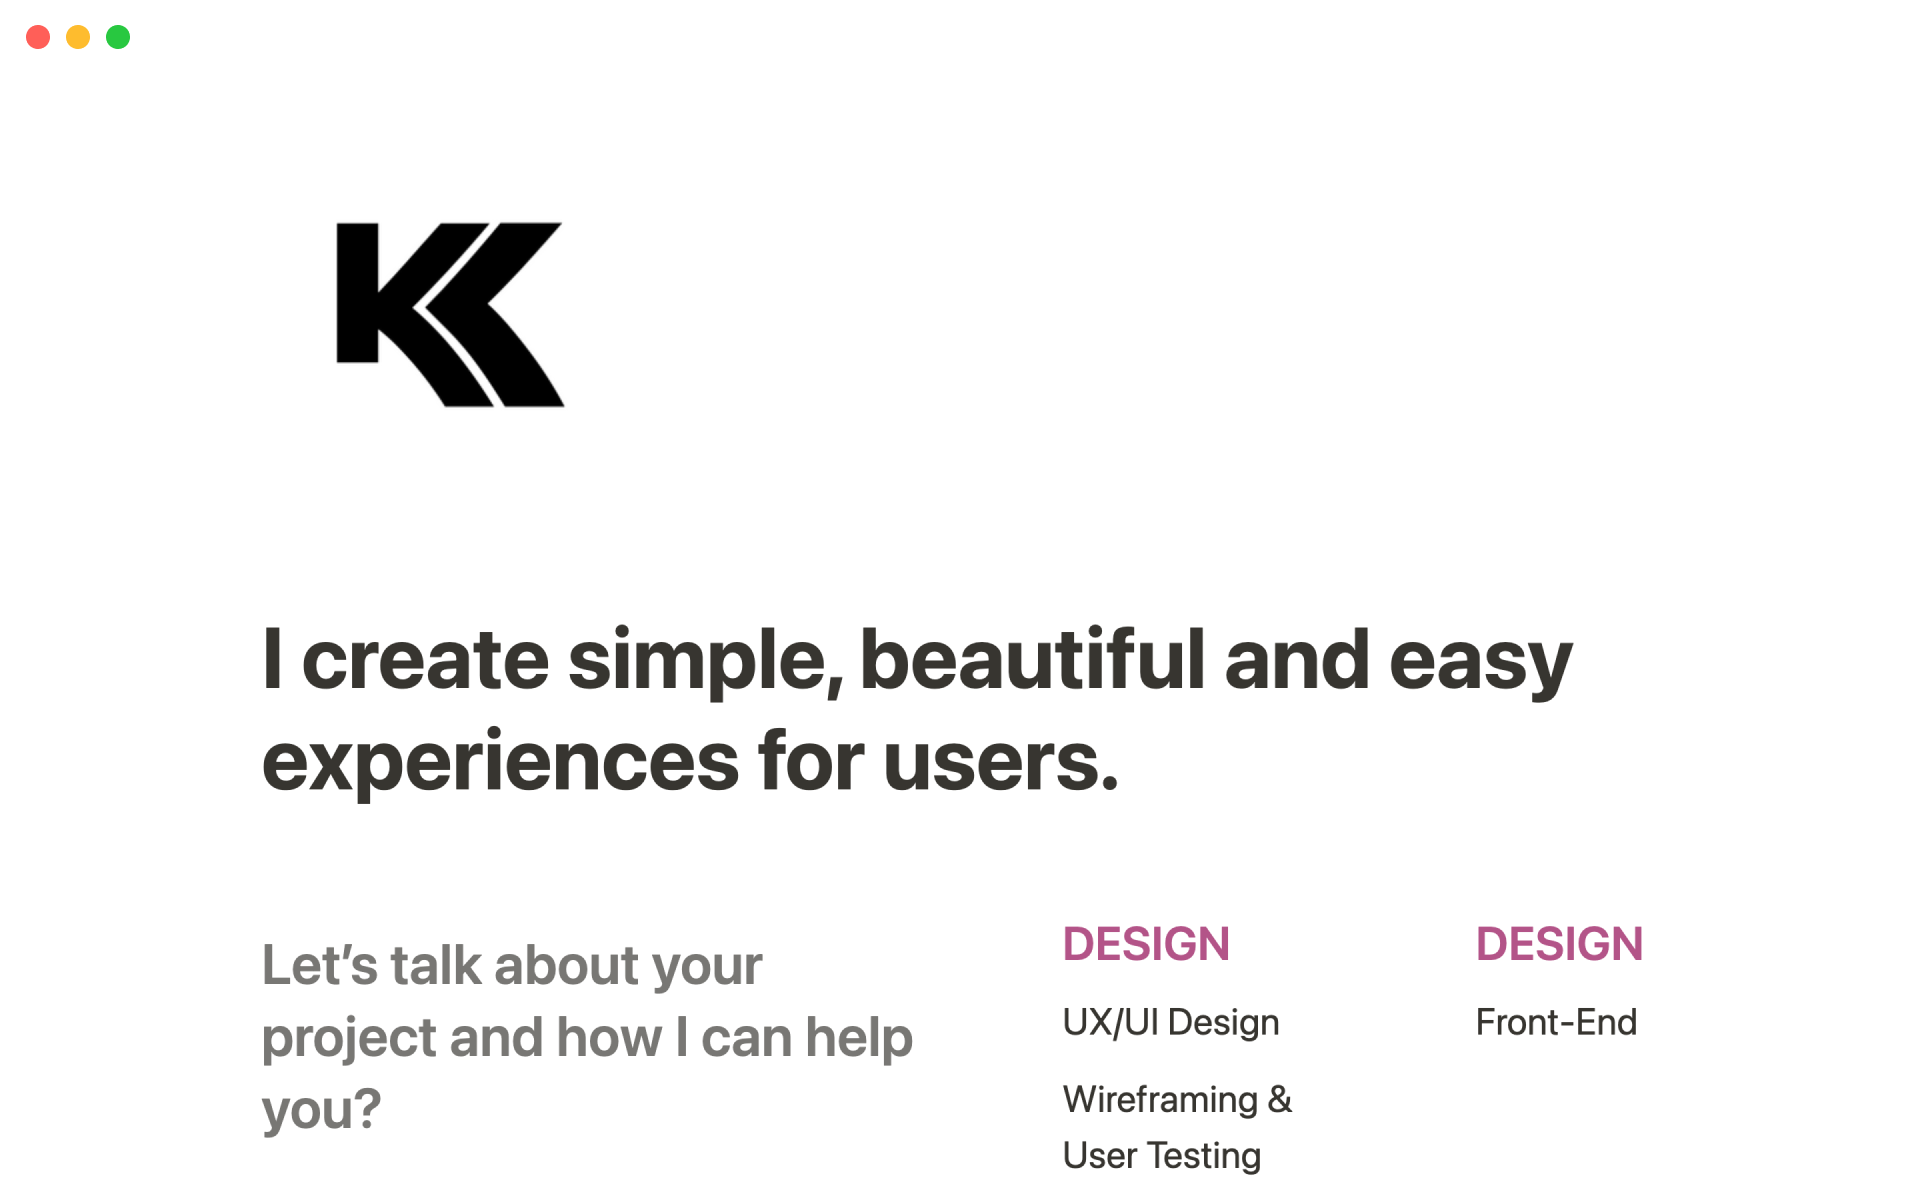 Easily share your projects with others and get your design portfolio online.